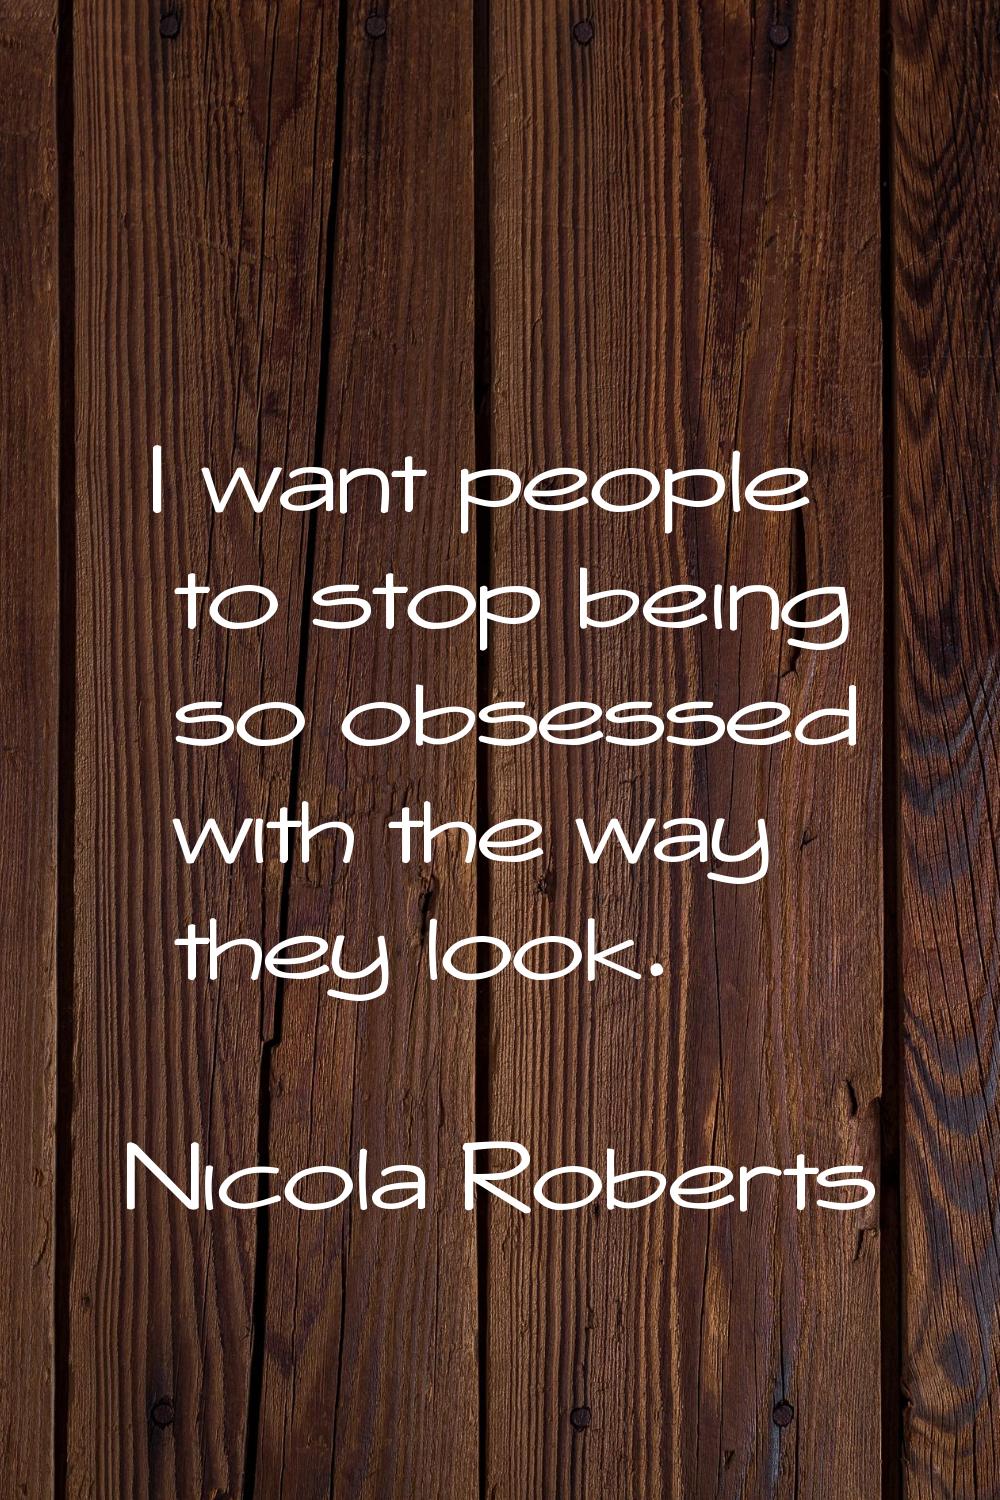 I want people to stop being so obsessed with the way they look.